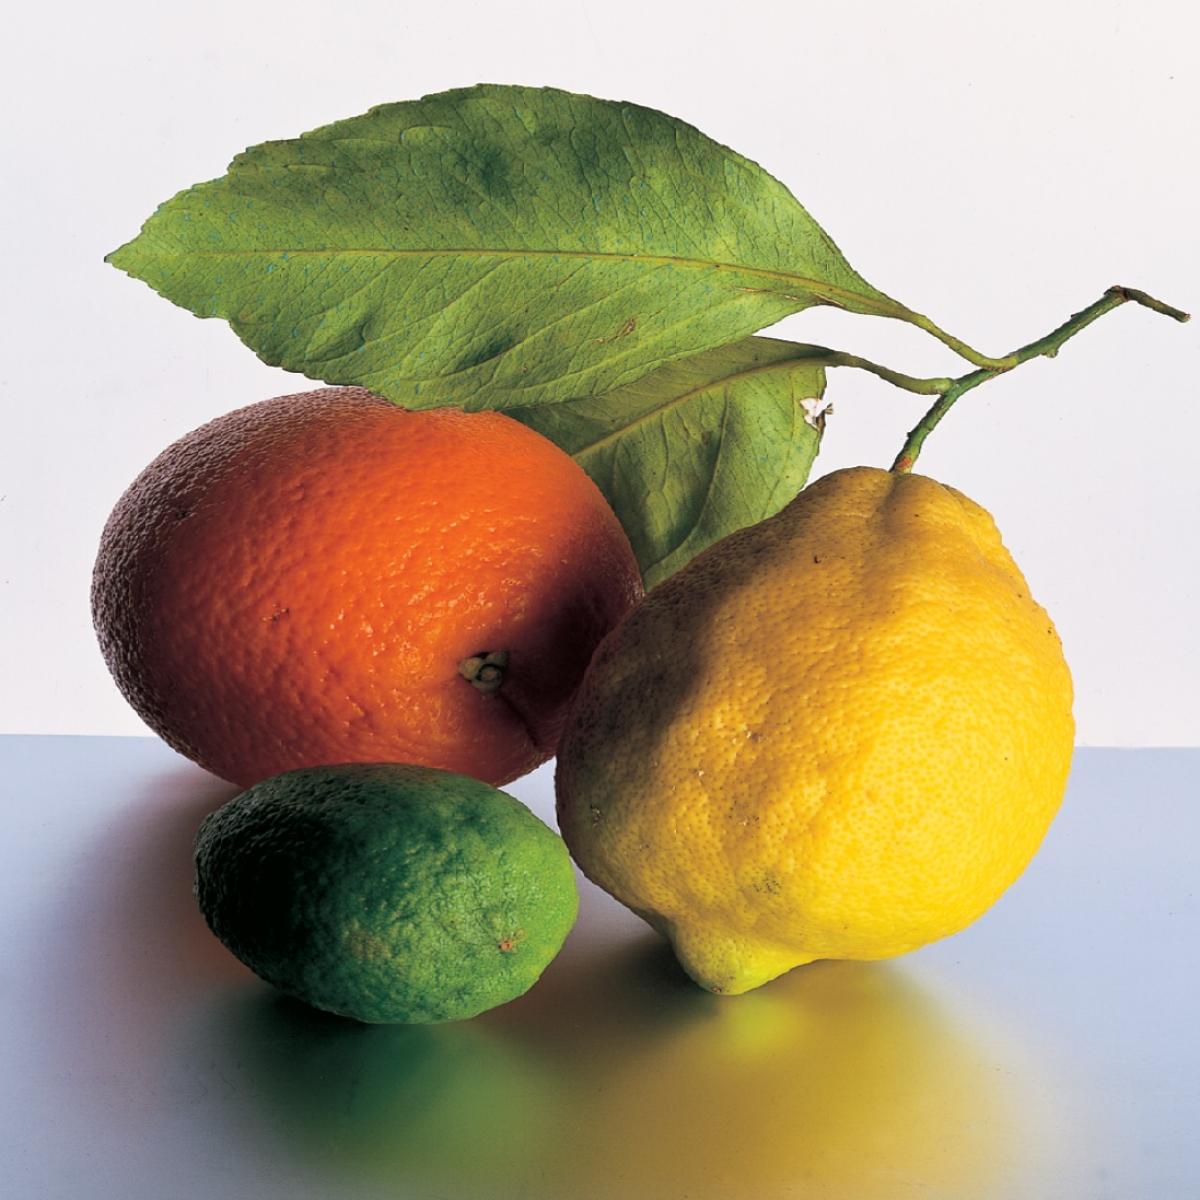 A picture of Lemons, limes and oranges